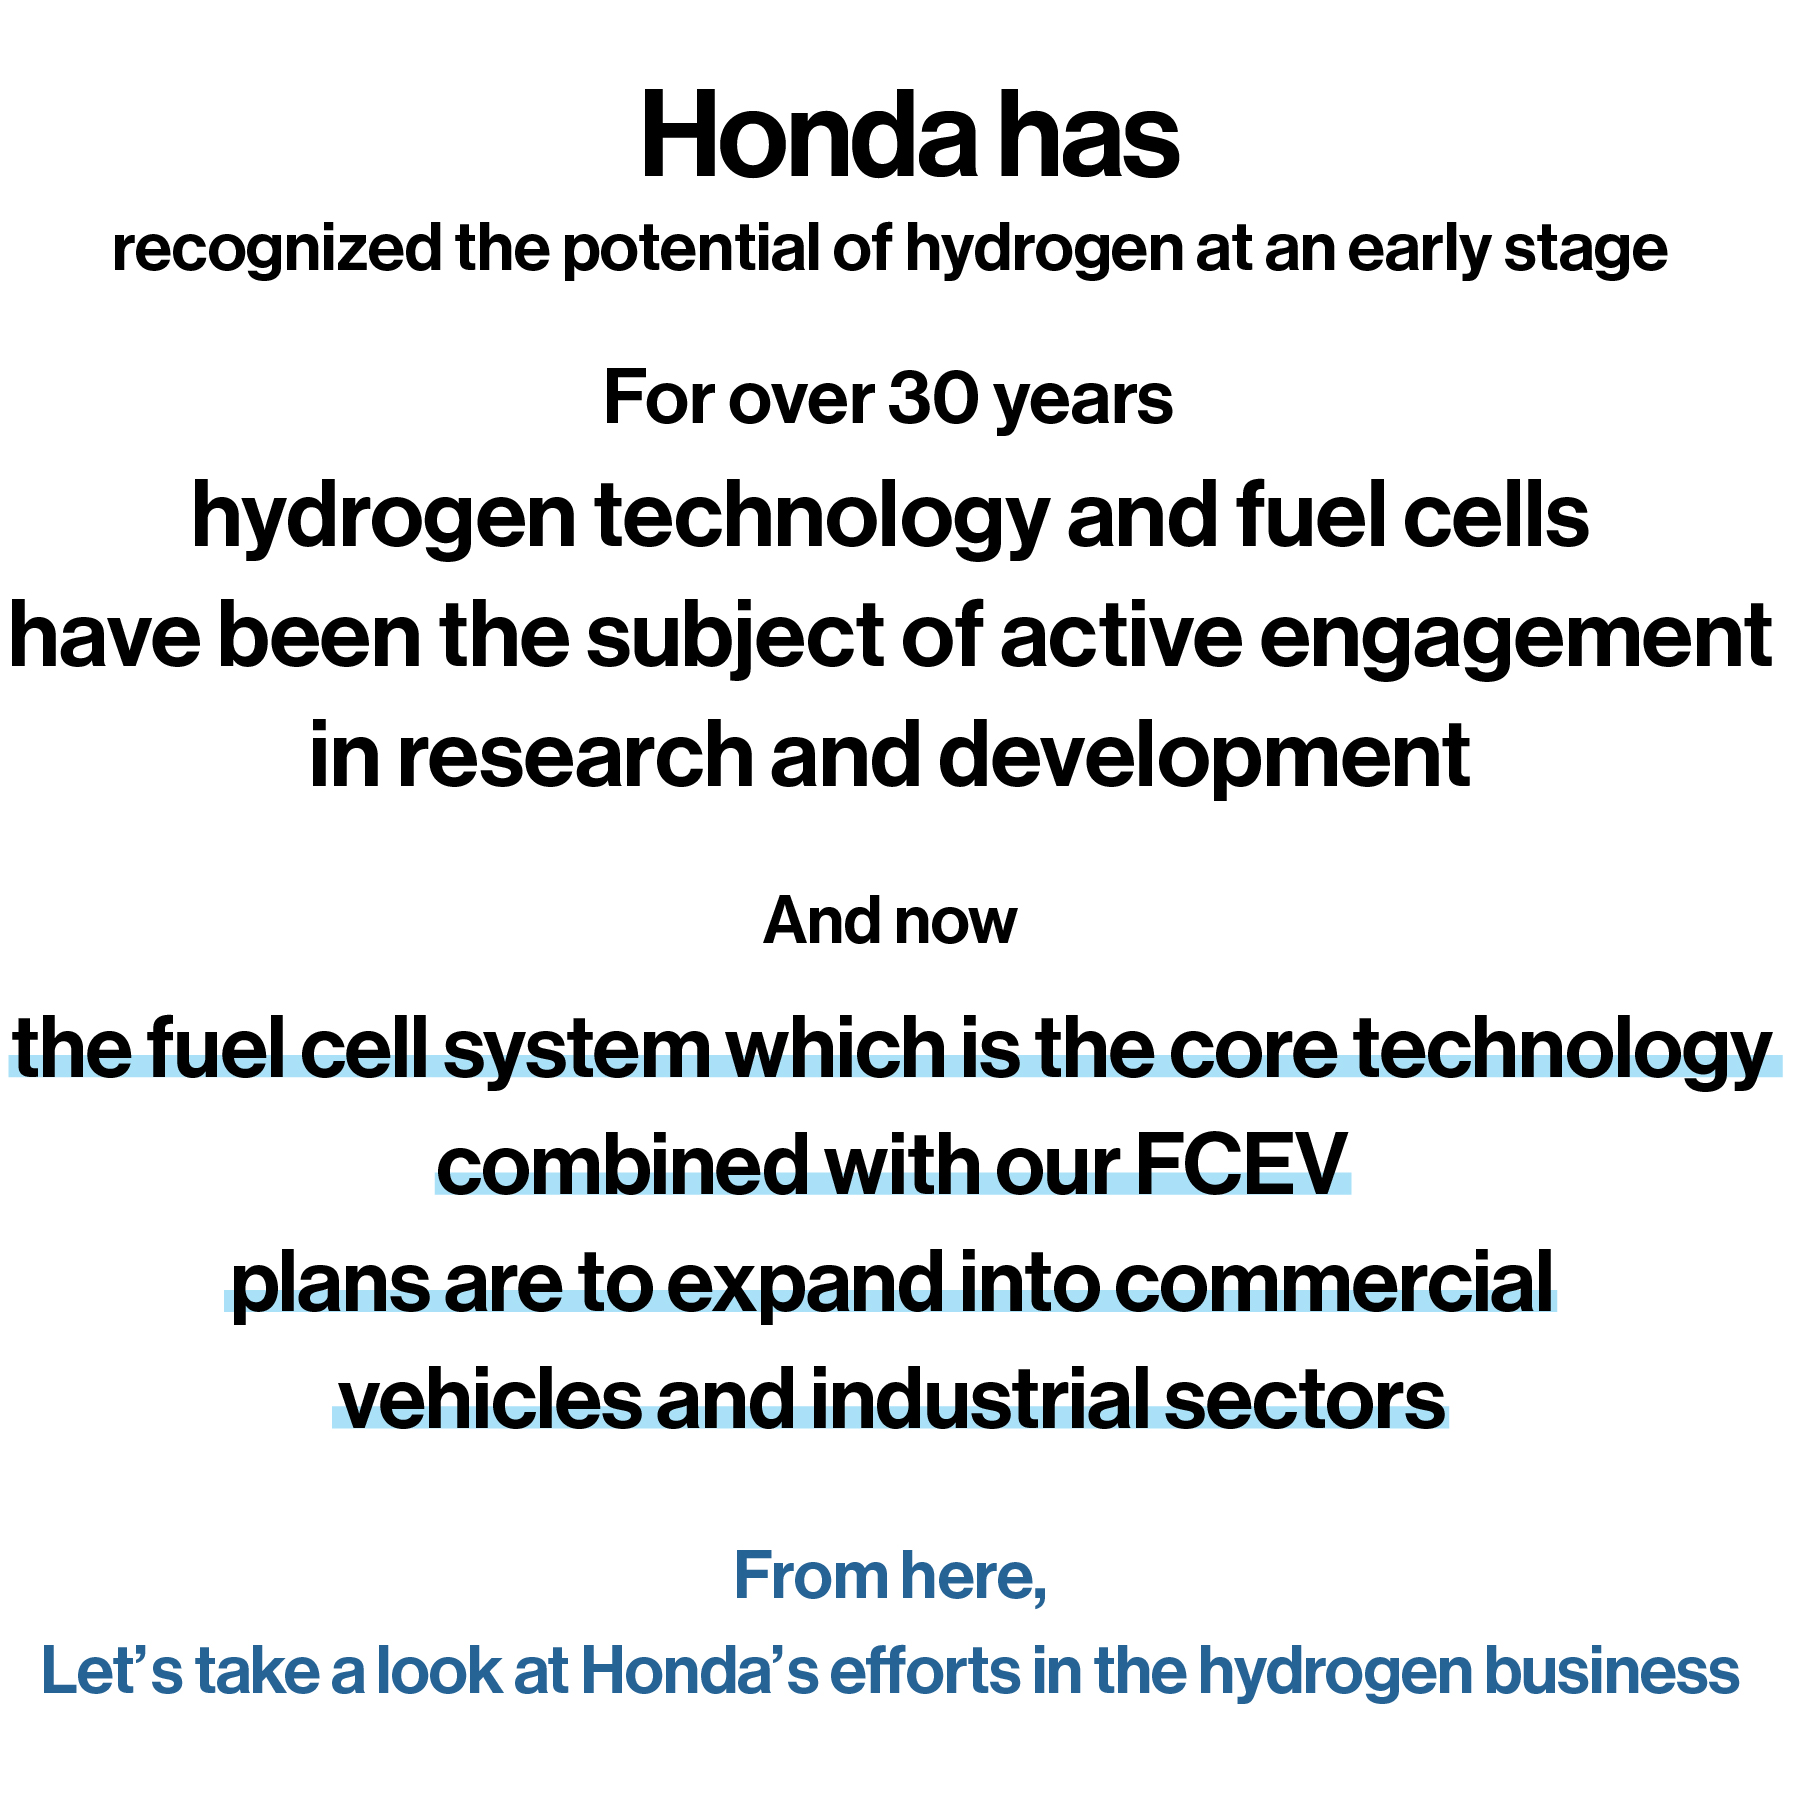 In the future, Honda plans to expand the use of fuel cell systems beyond FCEVs to include commercial vehicles and the industrial sectors